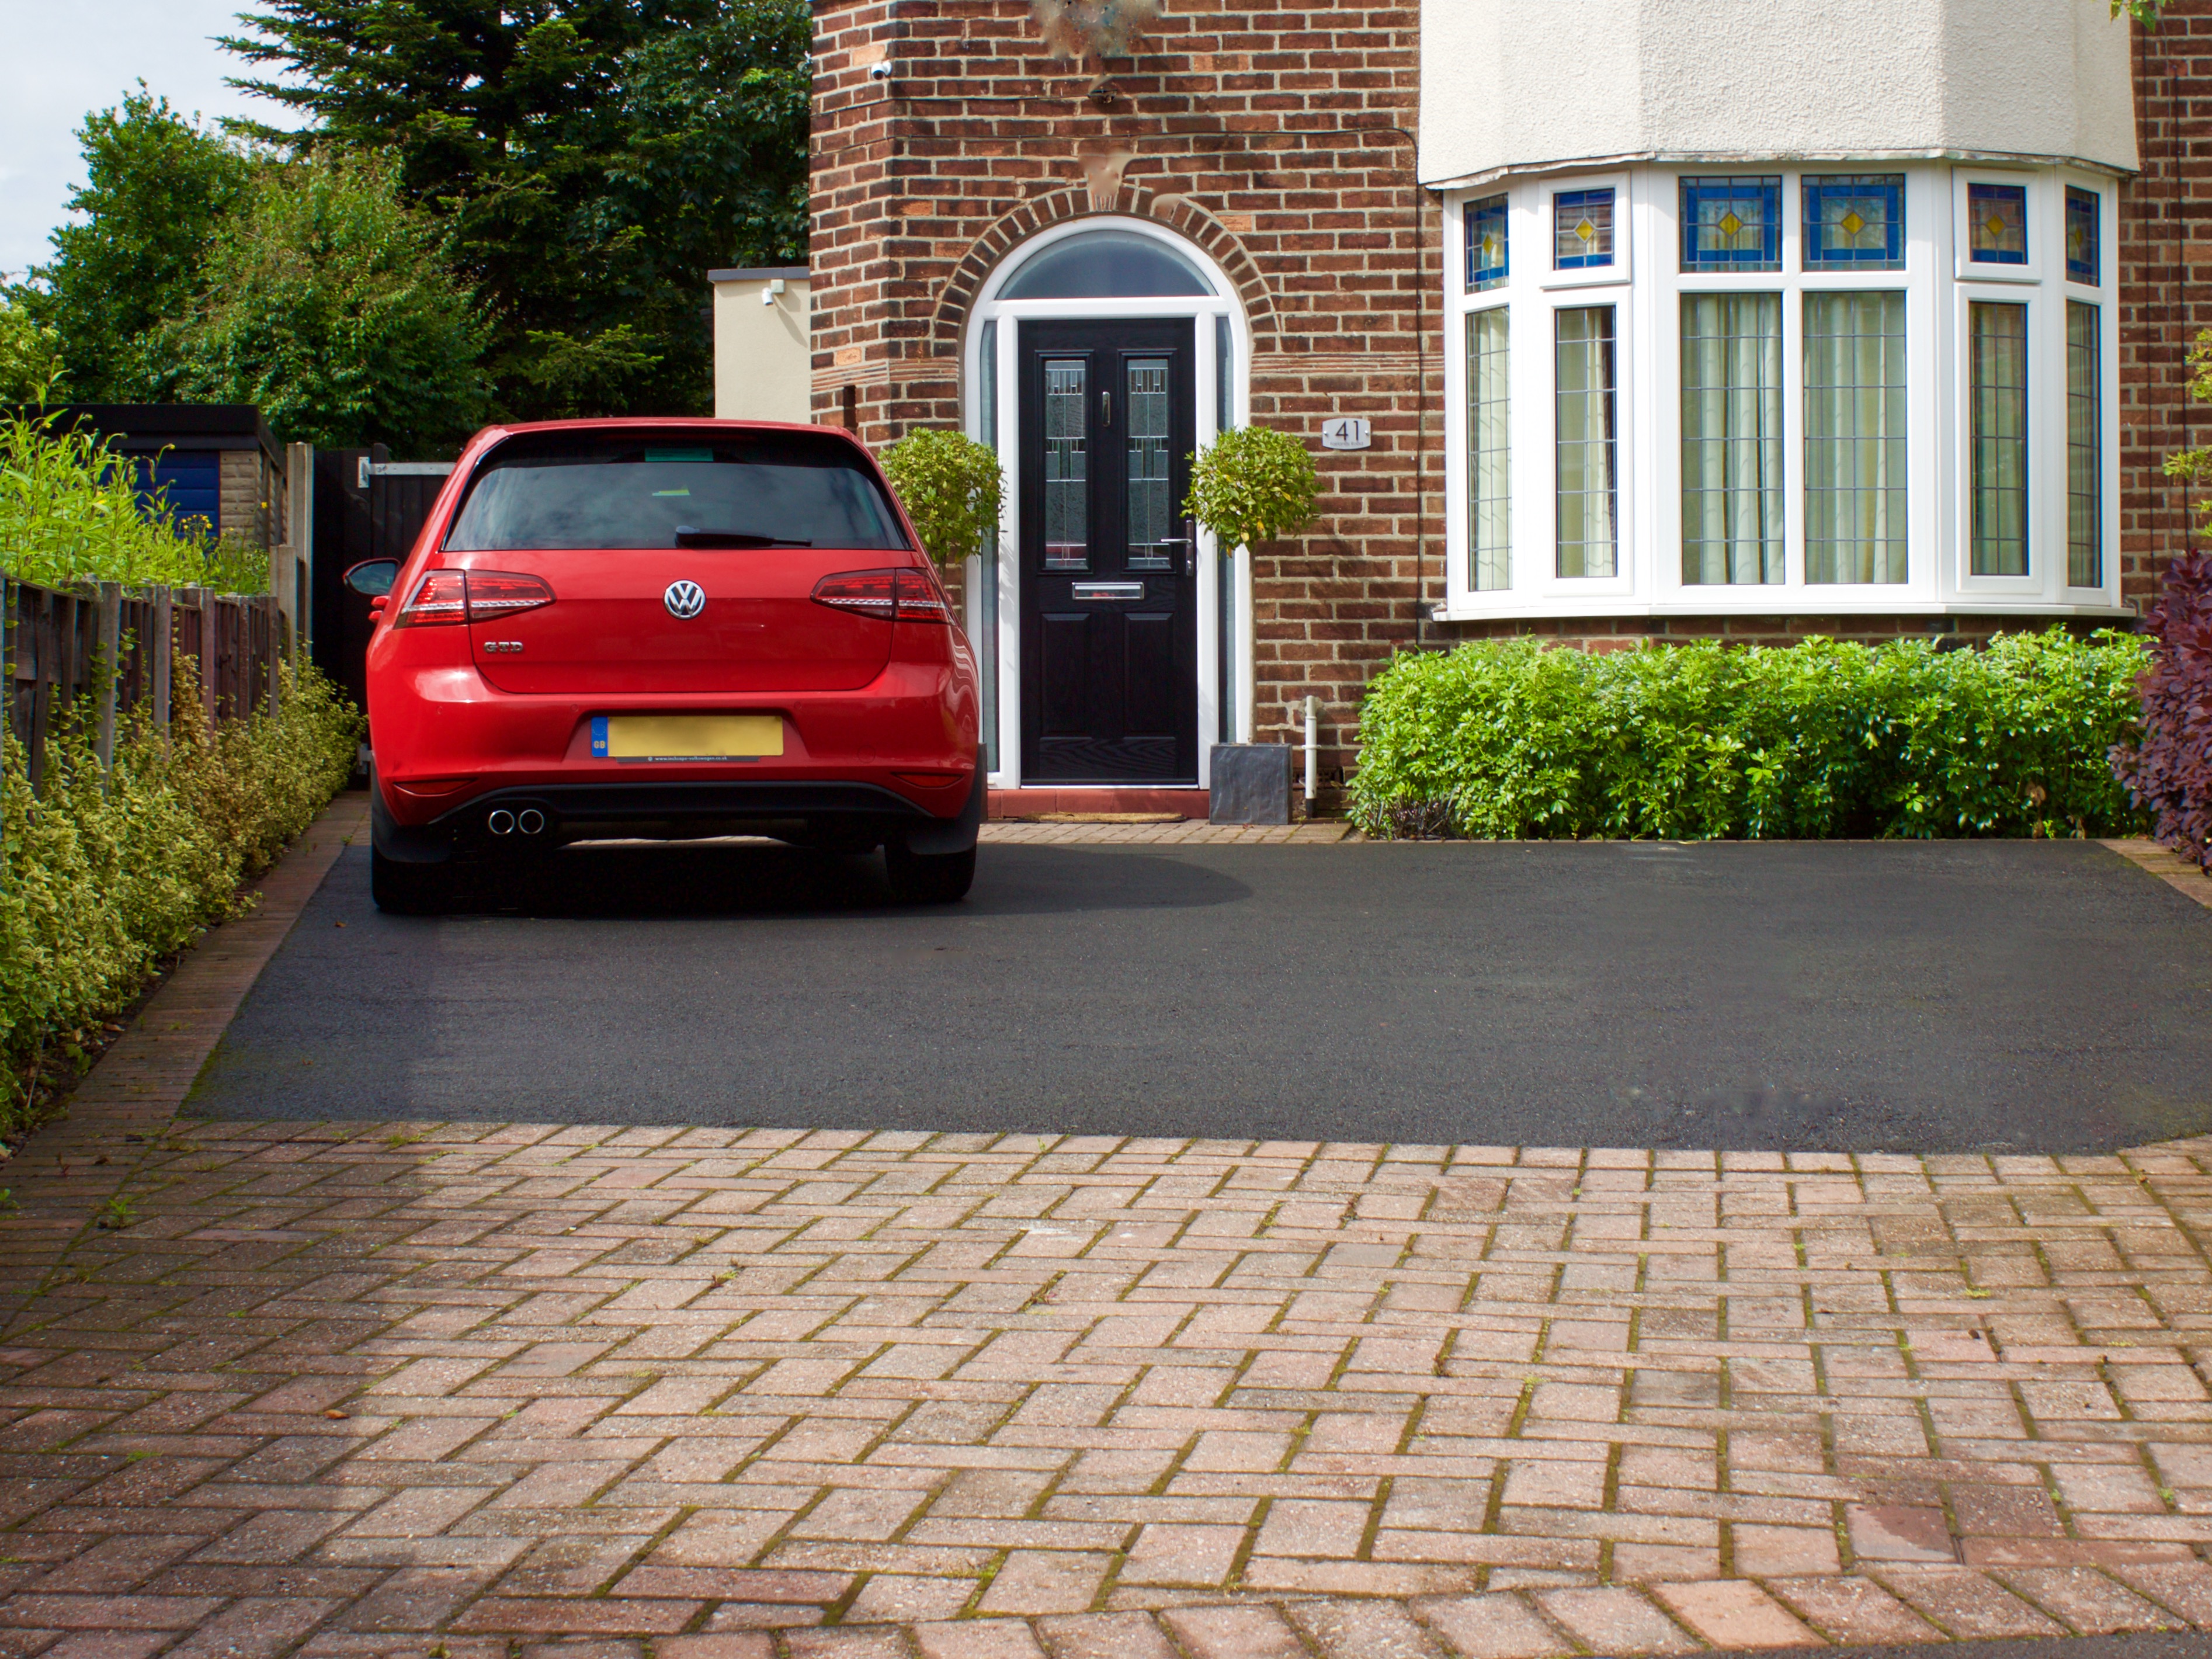 Driveway Design In Manchester & Cheshire.